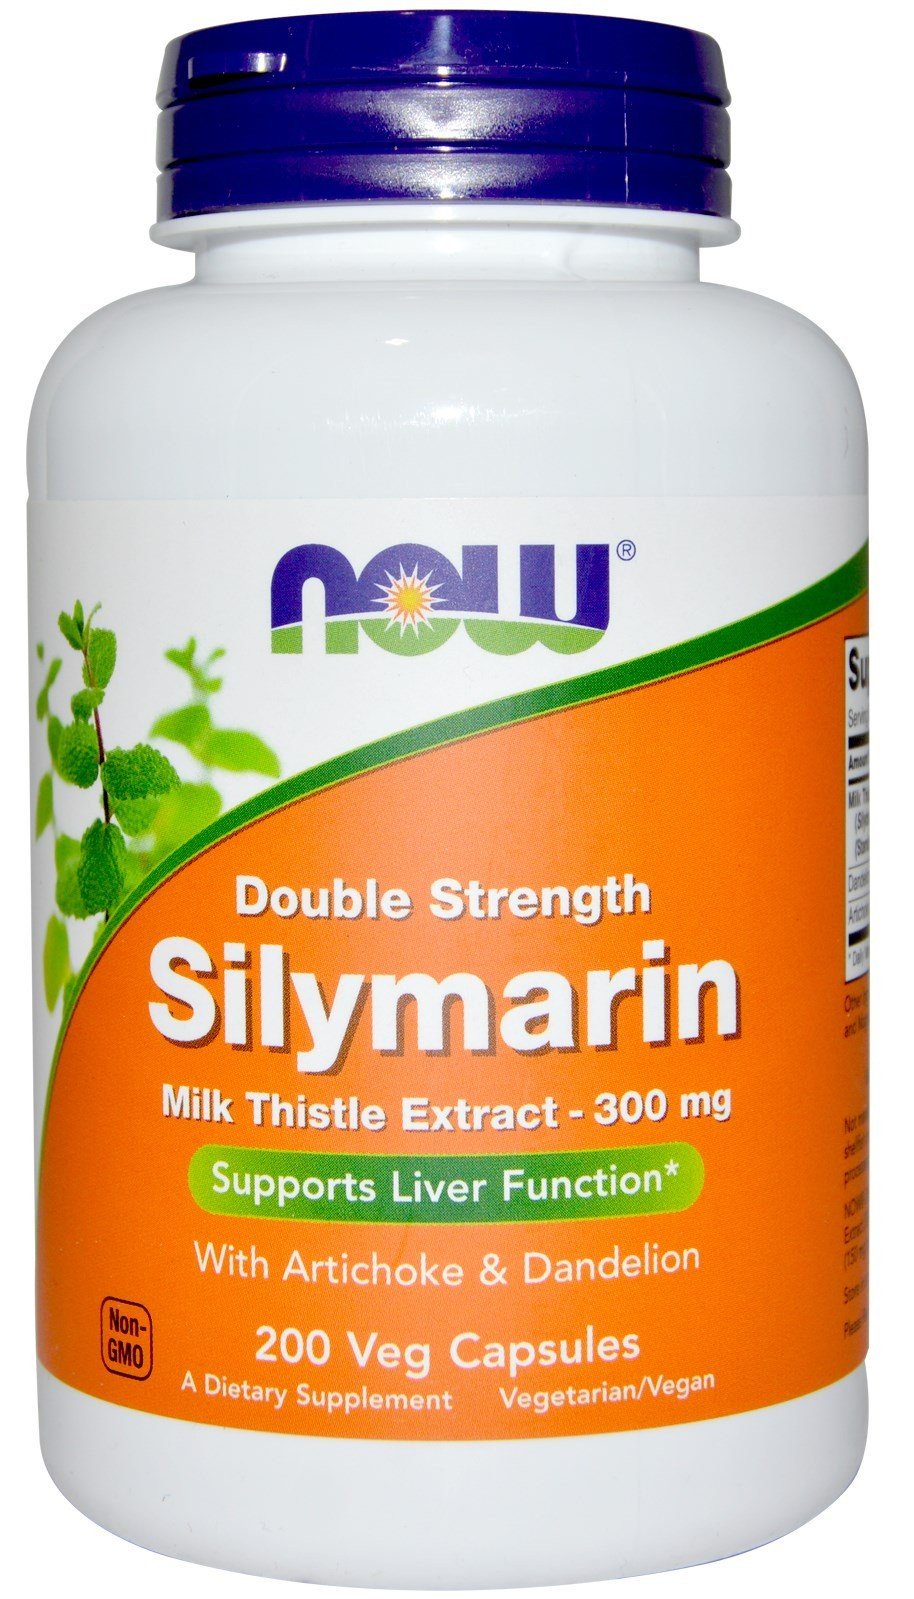 Double Strenght Silymarin, 200 pcs, Now. Special supplements. 